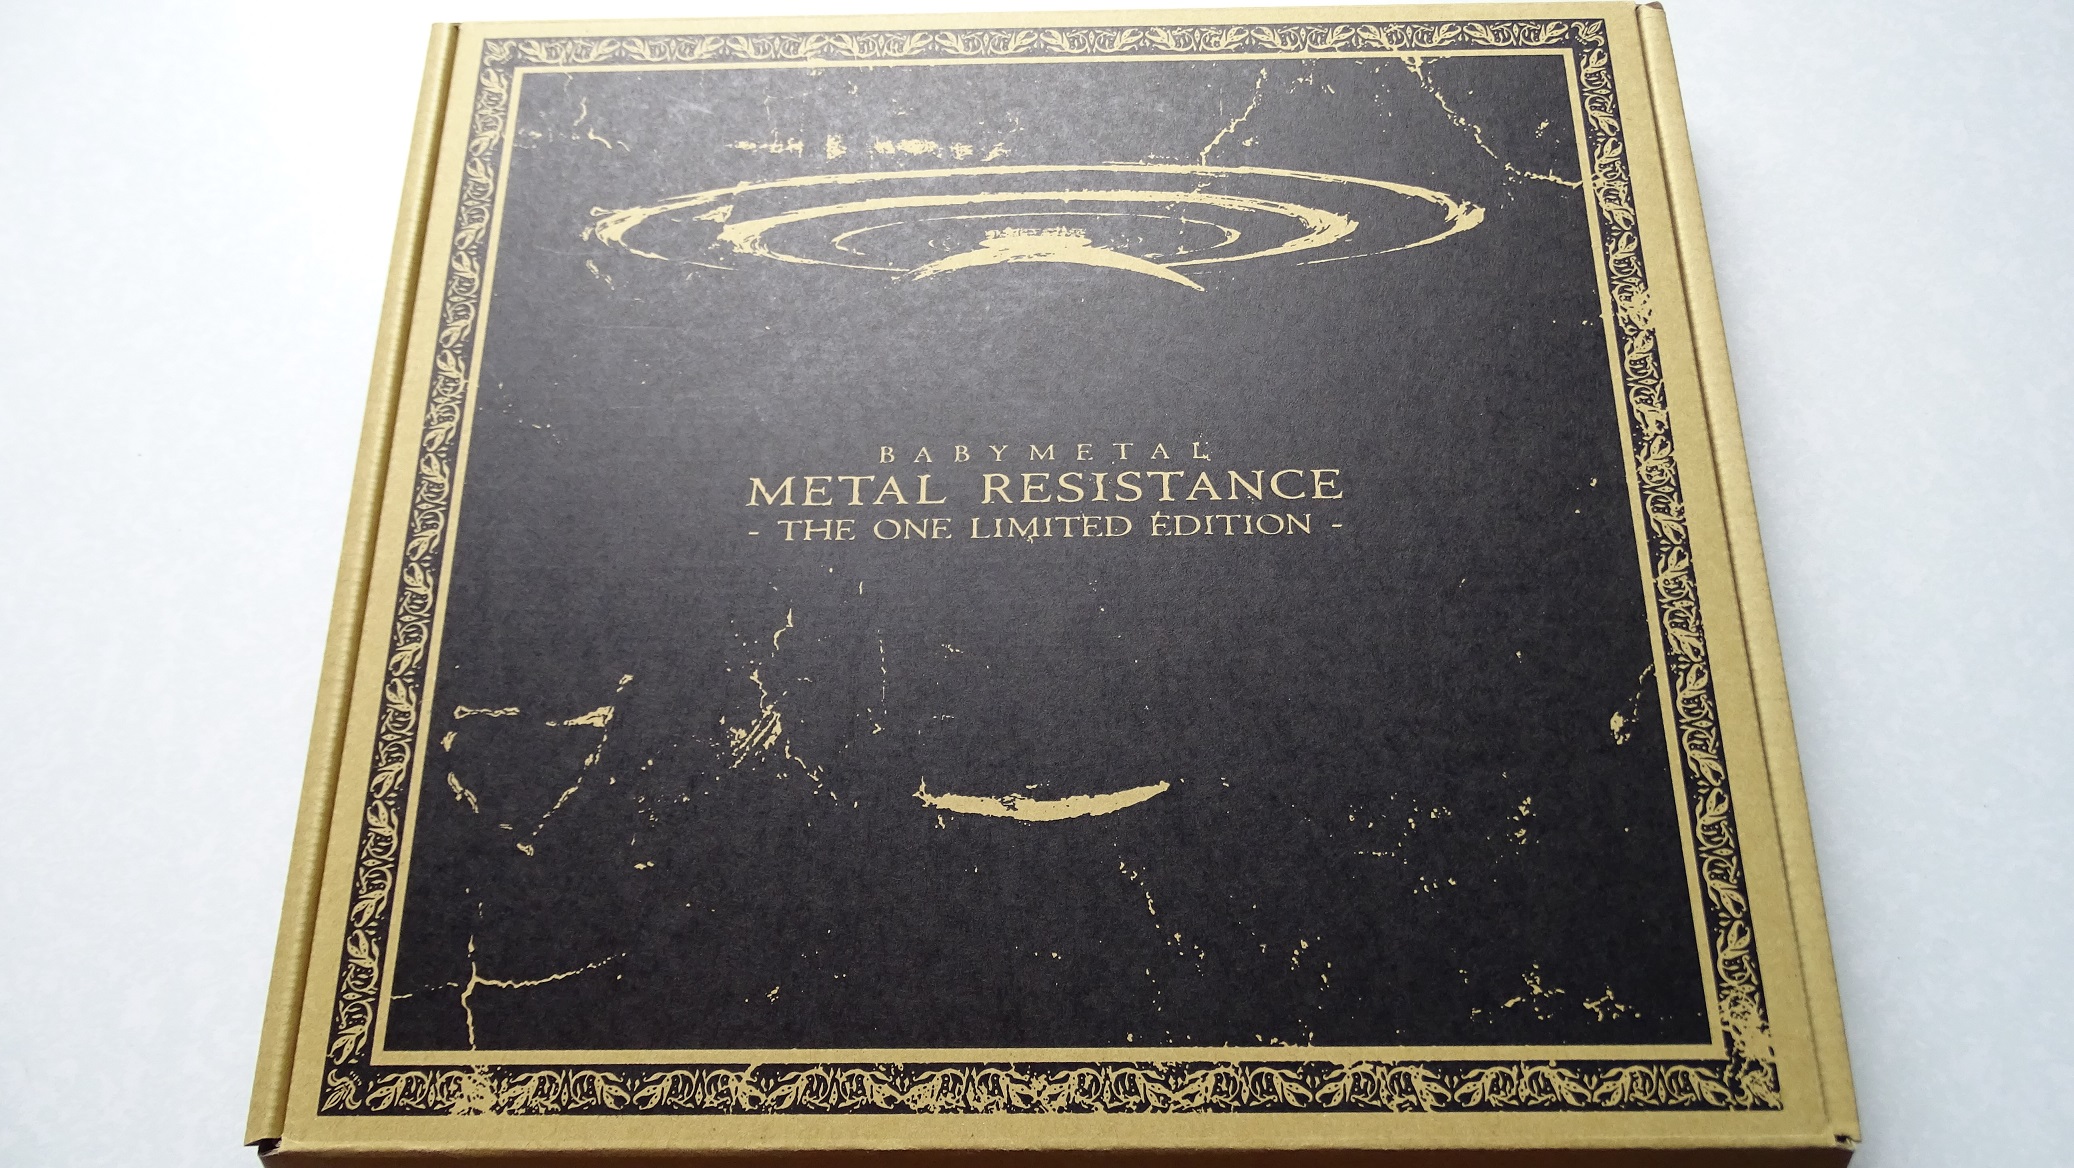 METAL RESISTANCE THE ONE LIMITED EDITION